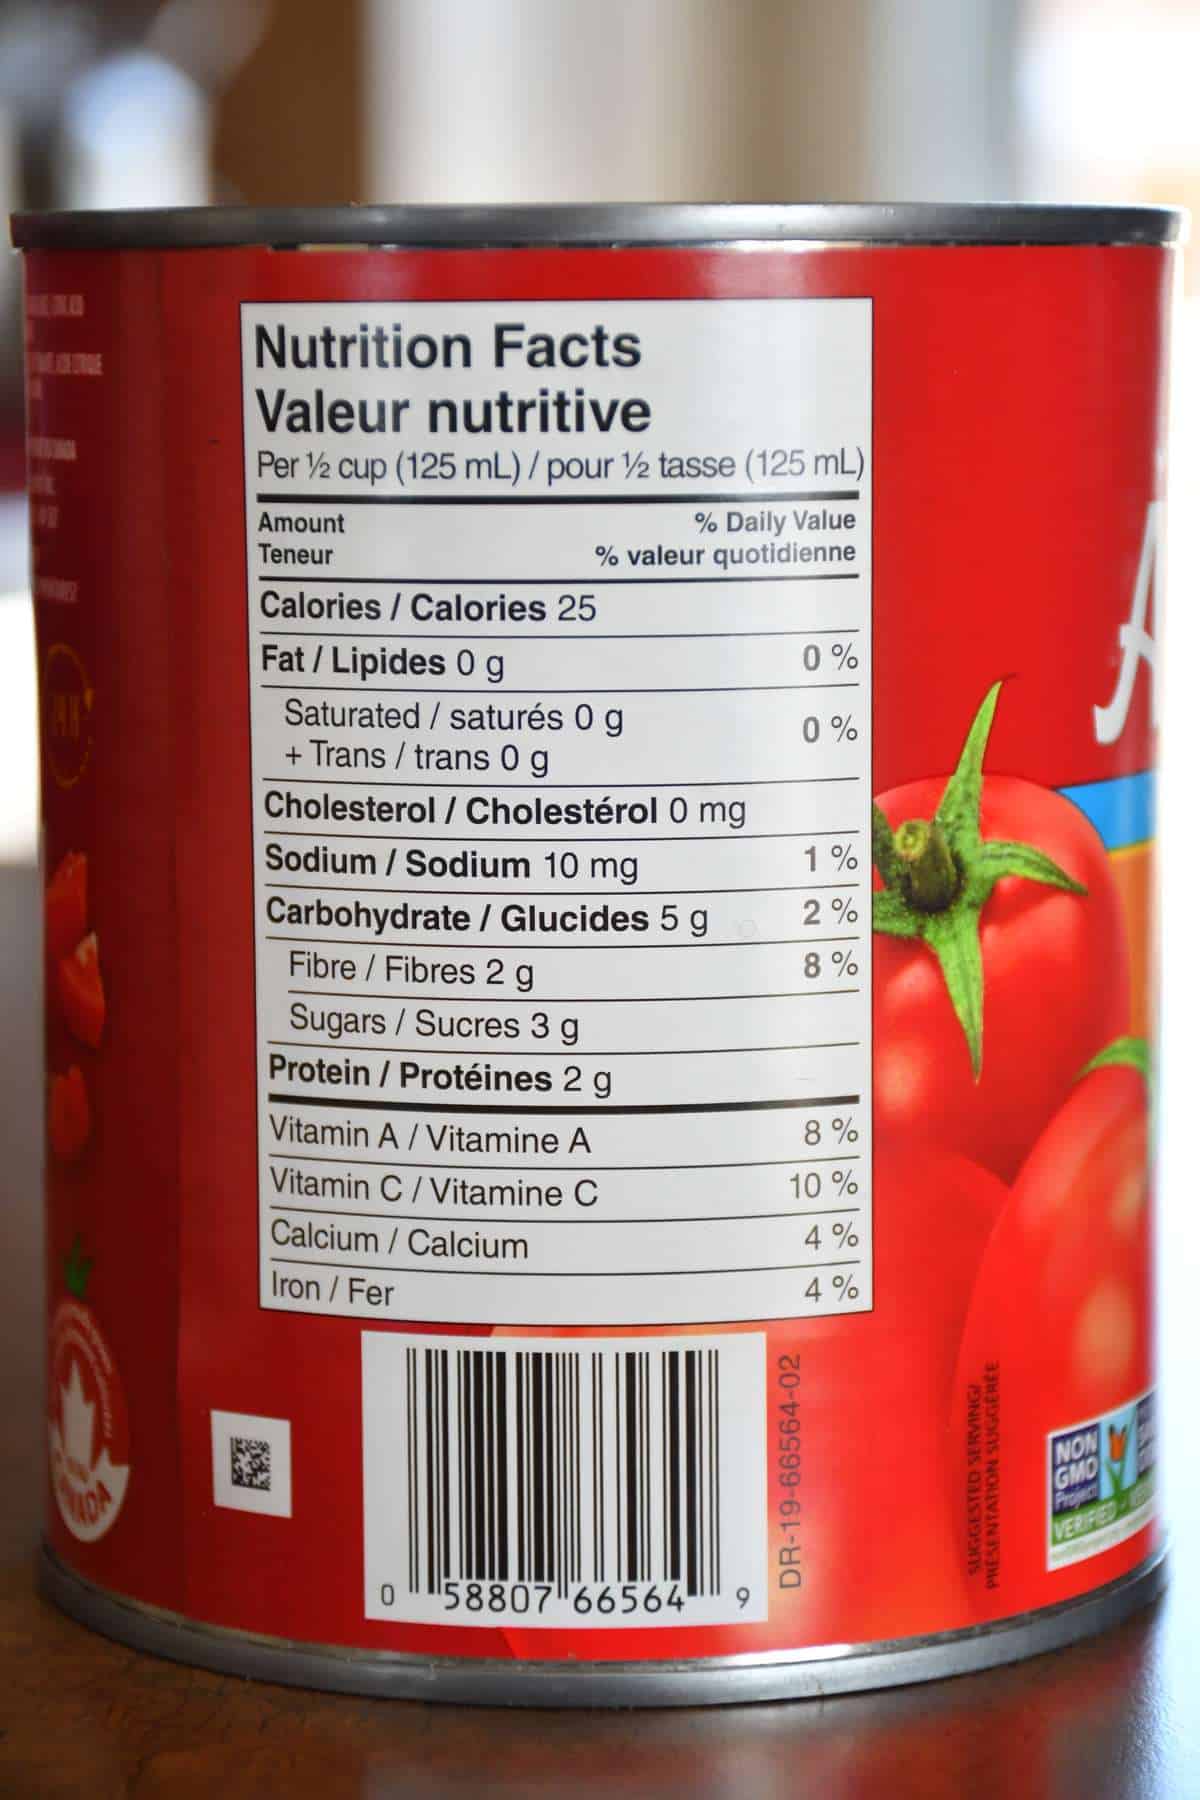 Nutrition label example from a can of diced tomatoes.